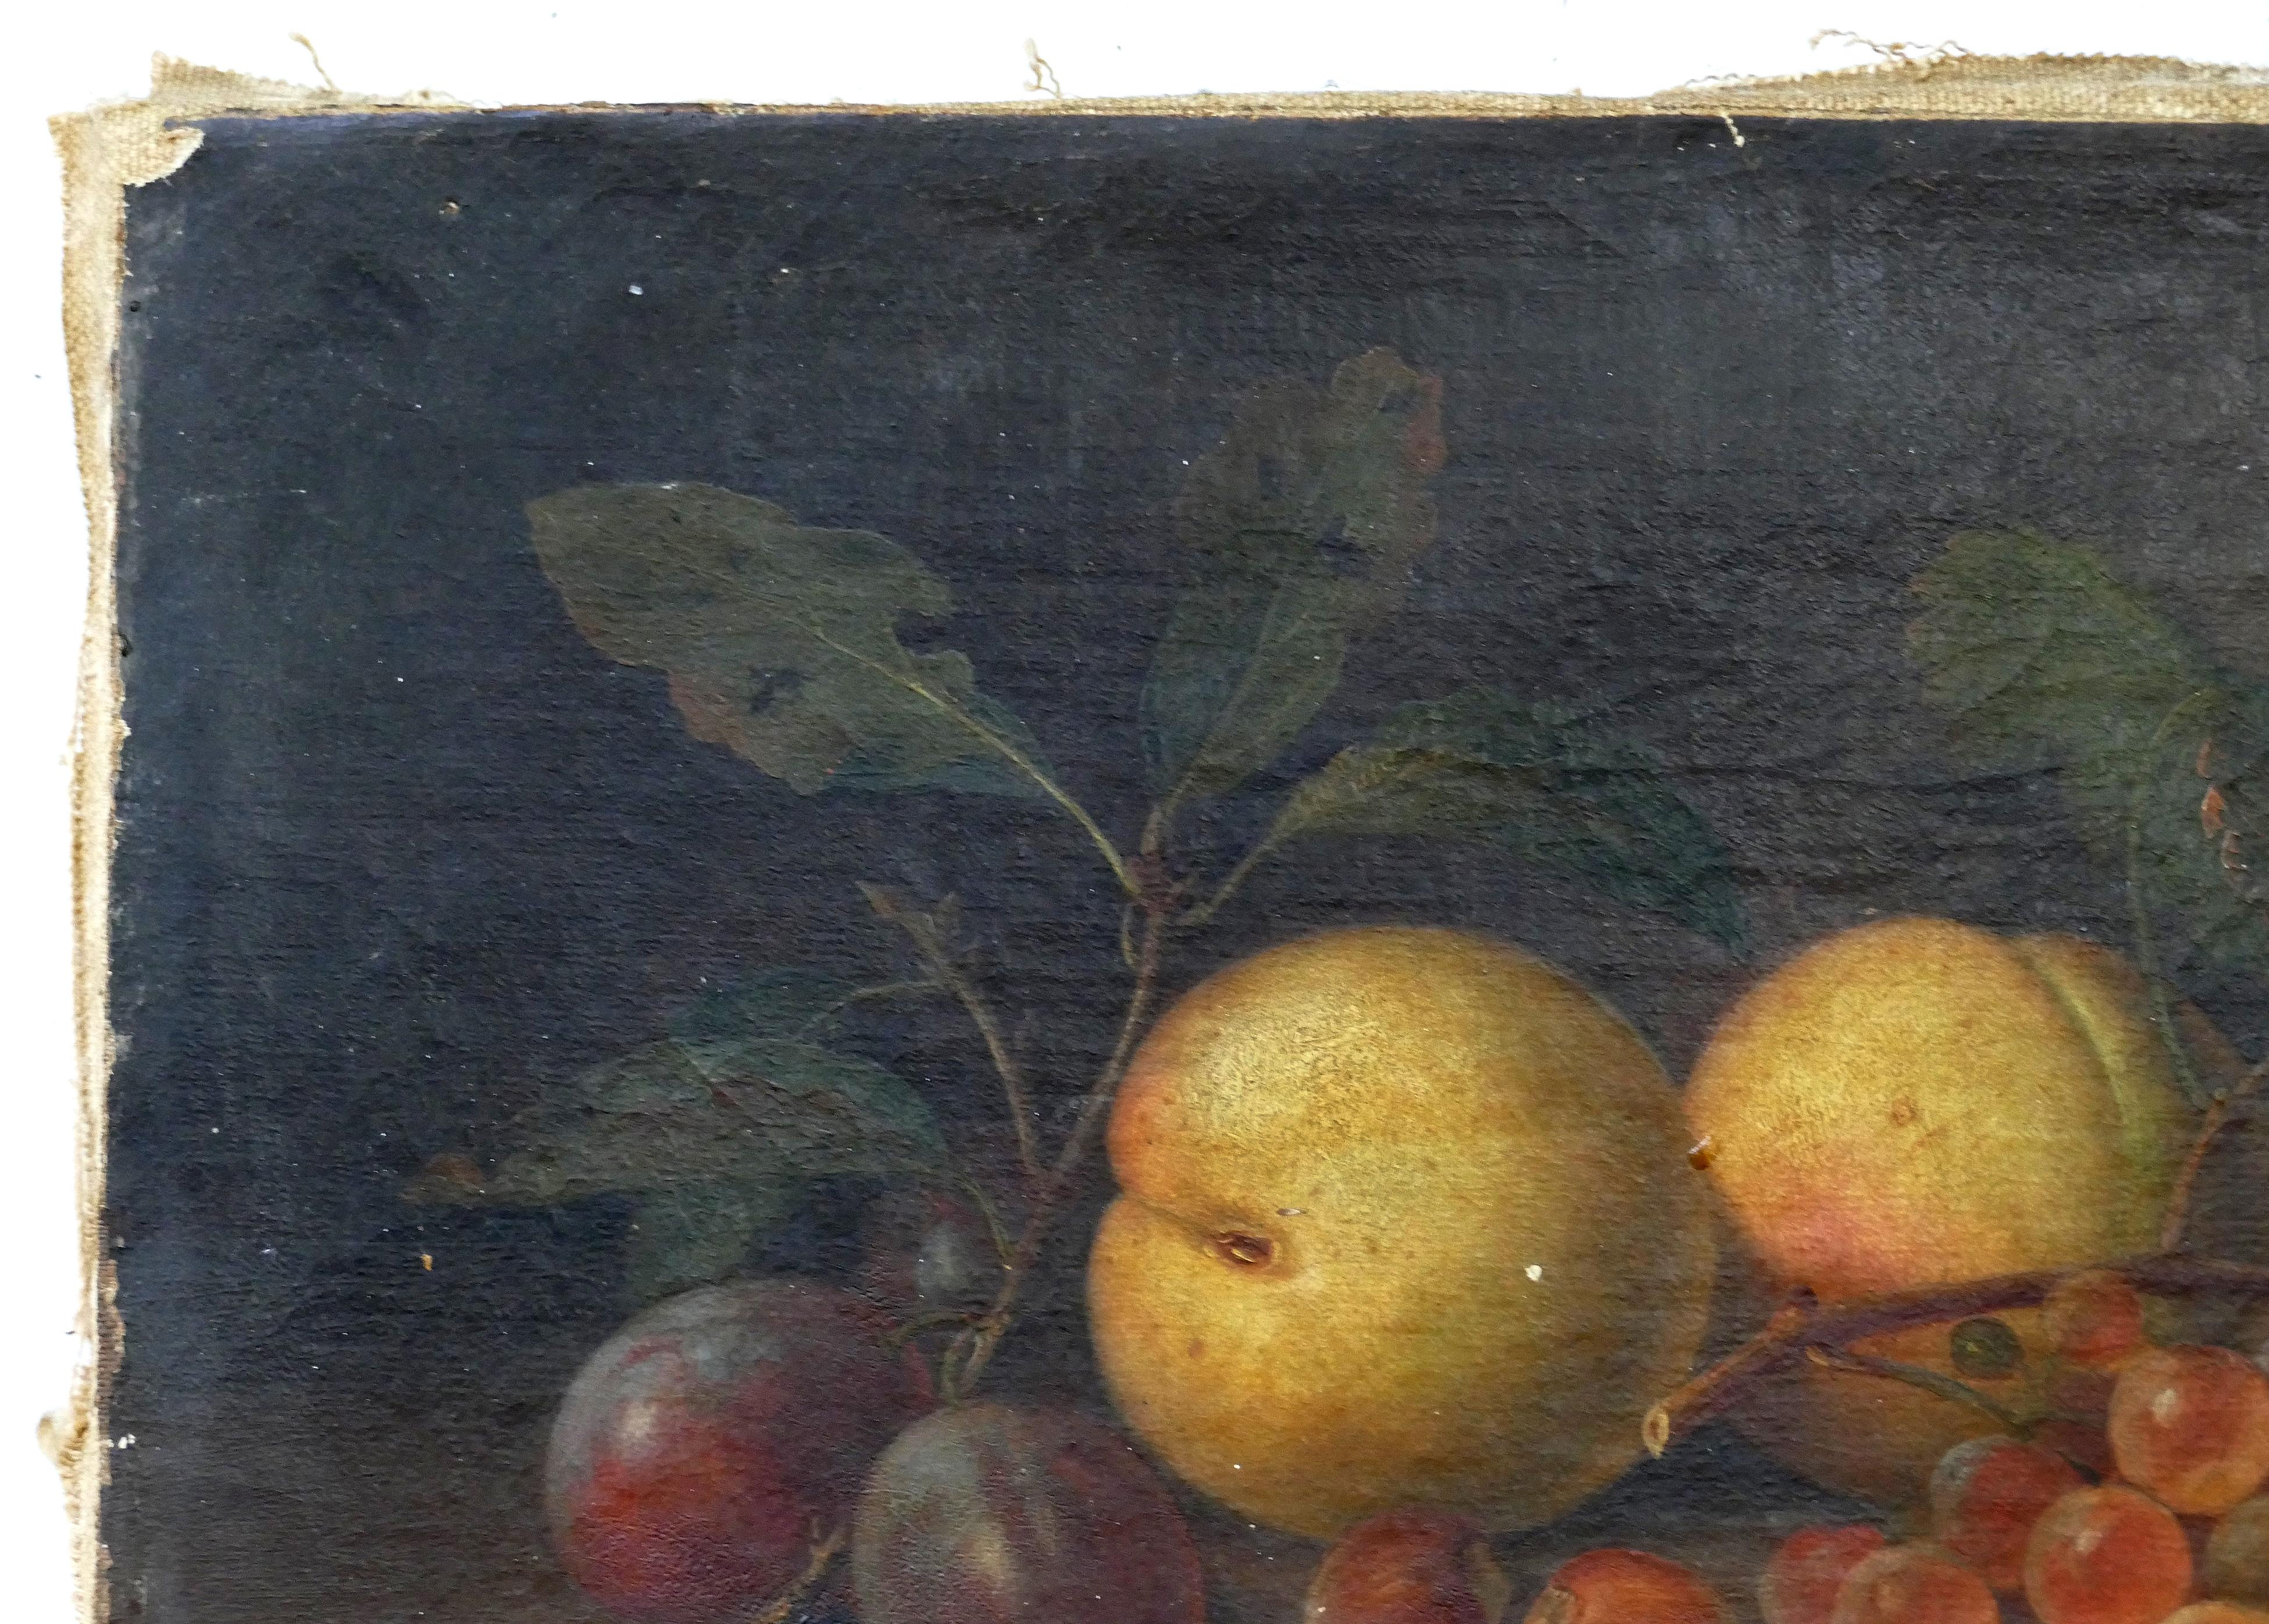 Paul LaCroix Fruit Still-Life Oil Painting on Canvas, 1865 in Original Frame 1